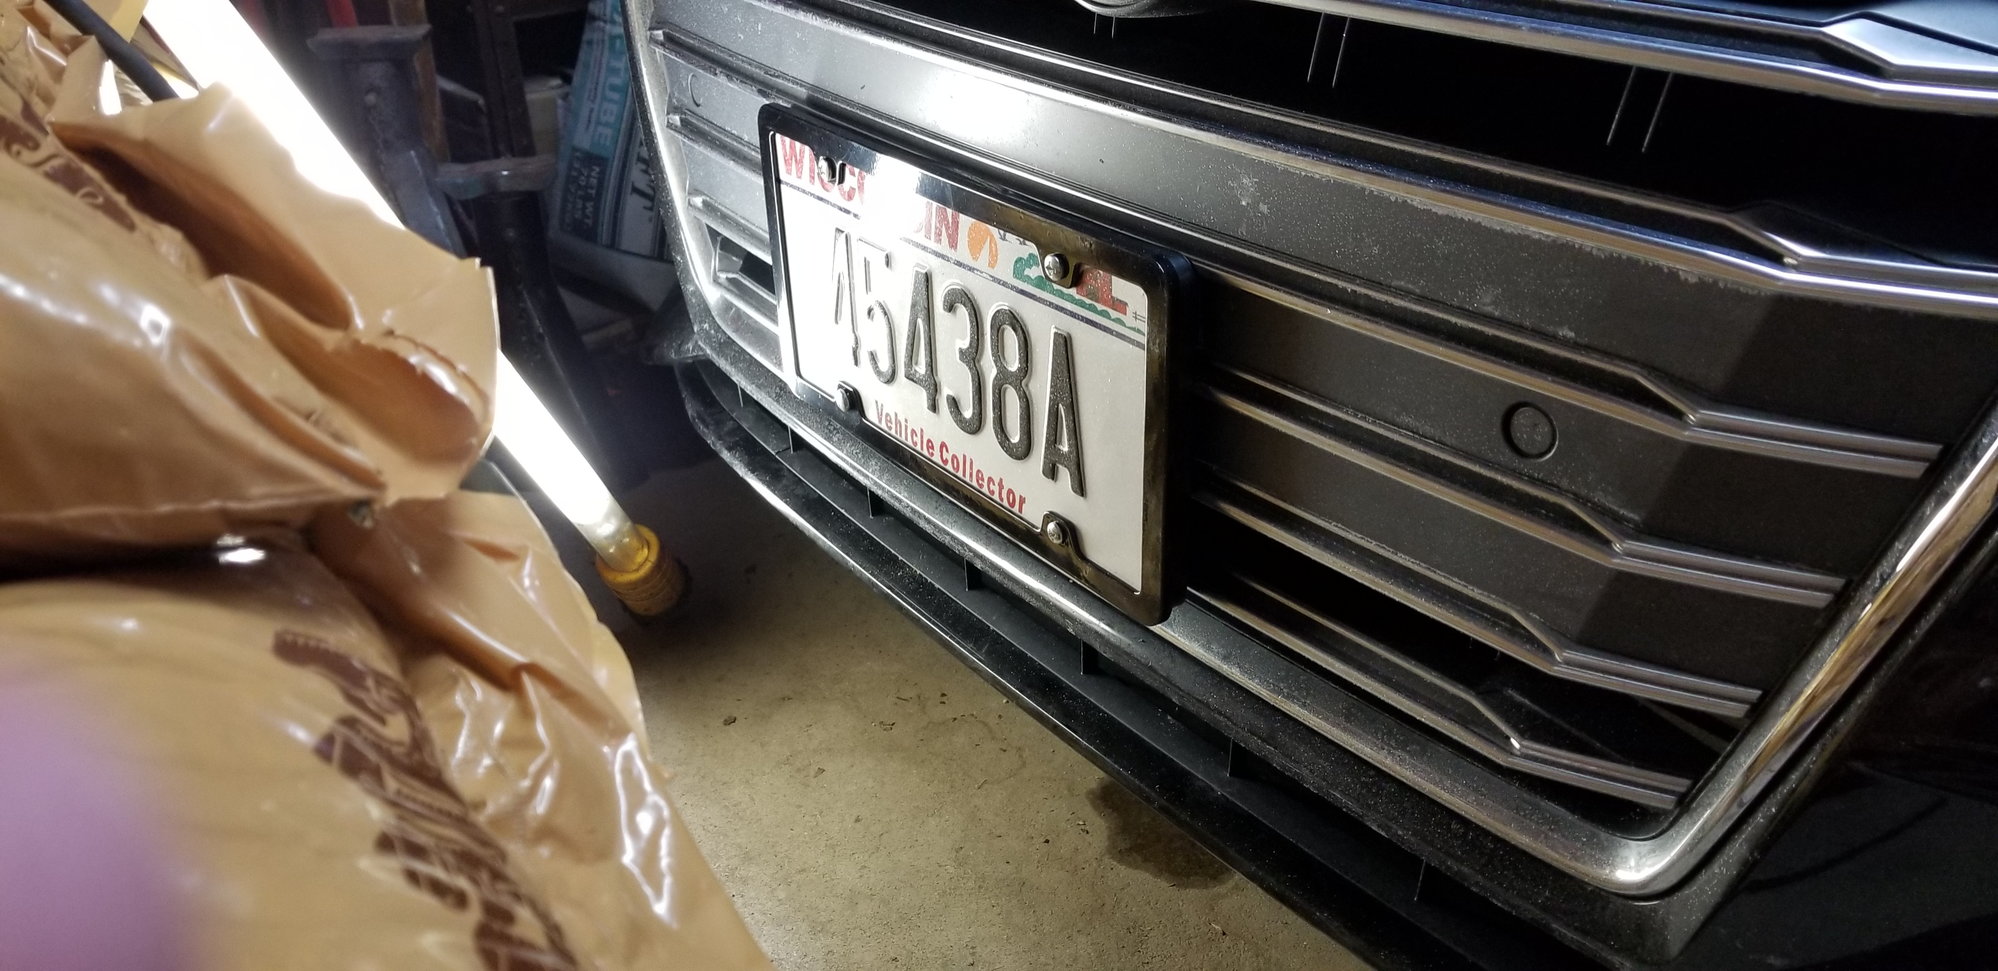 How To Install A Licence Plate Cover On Your Car 